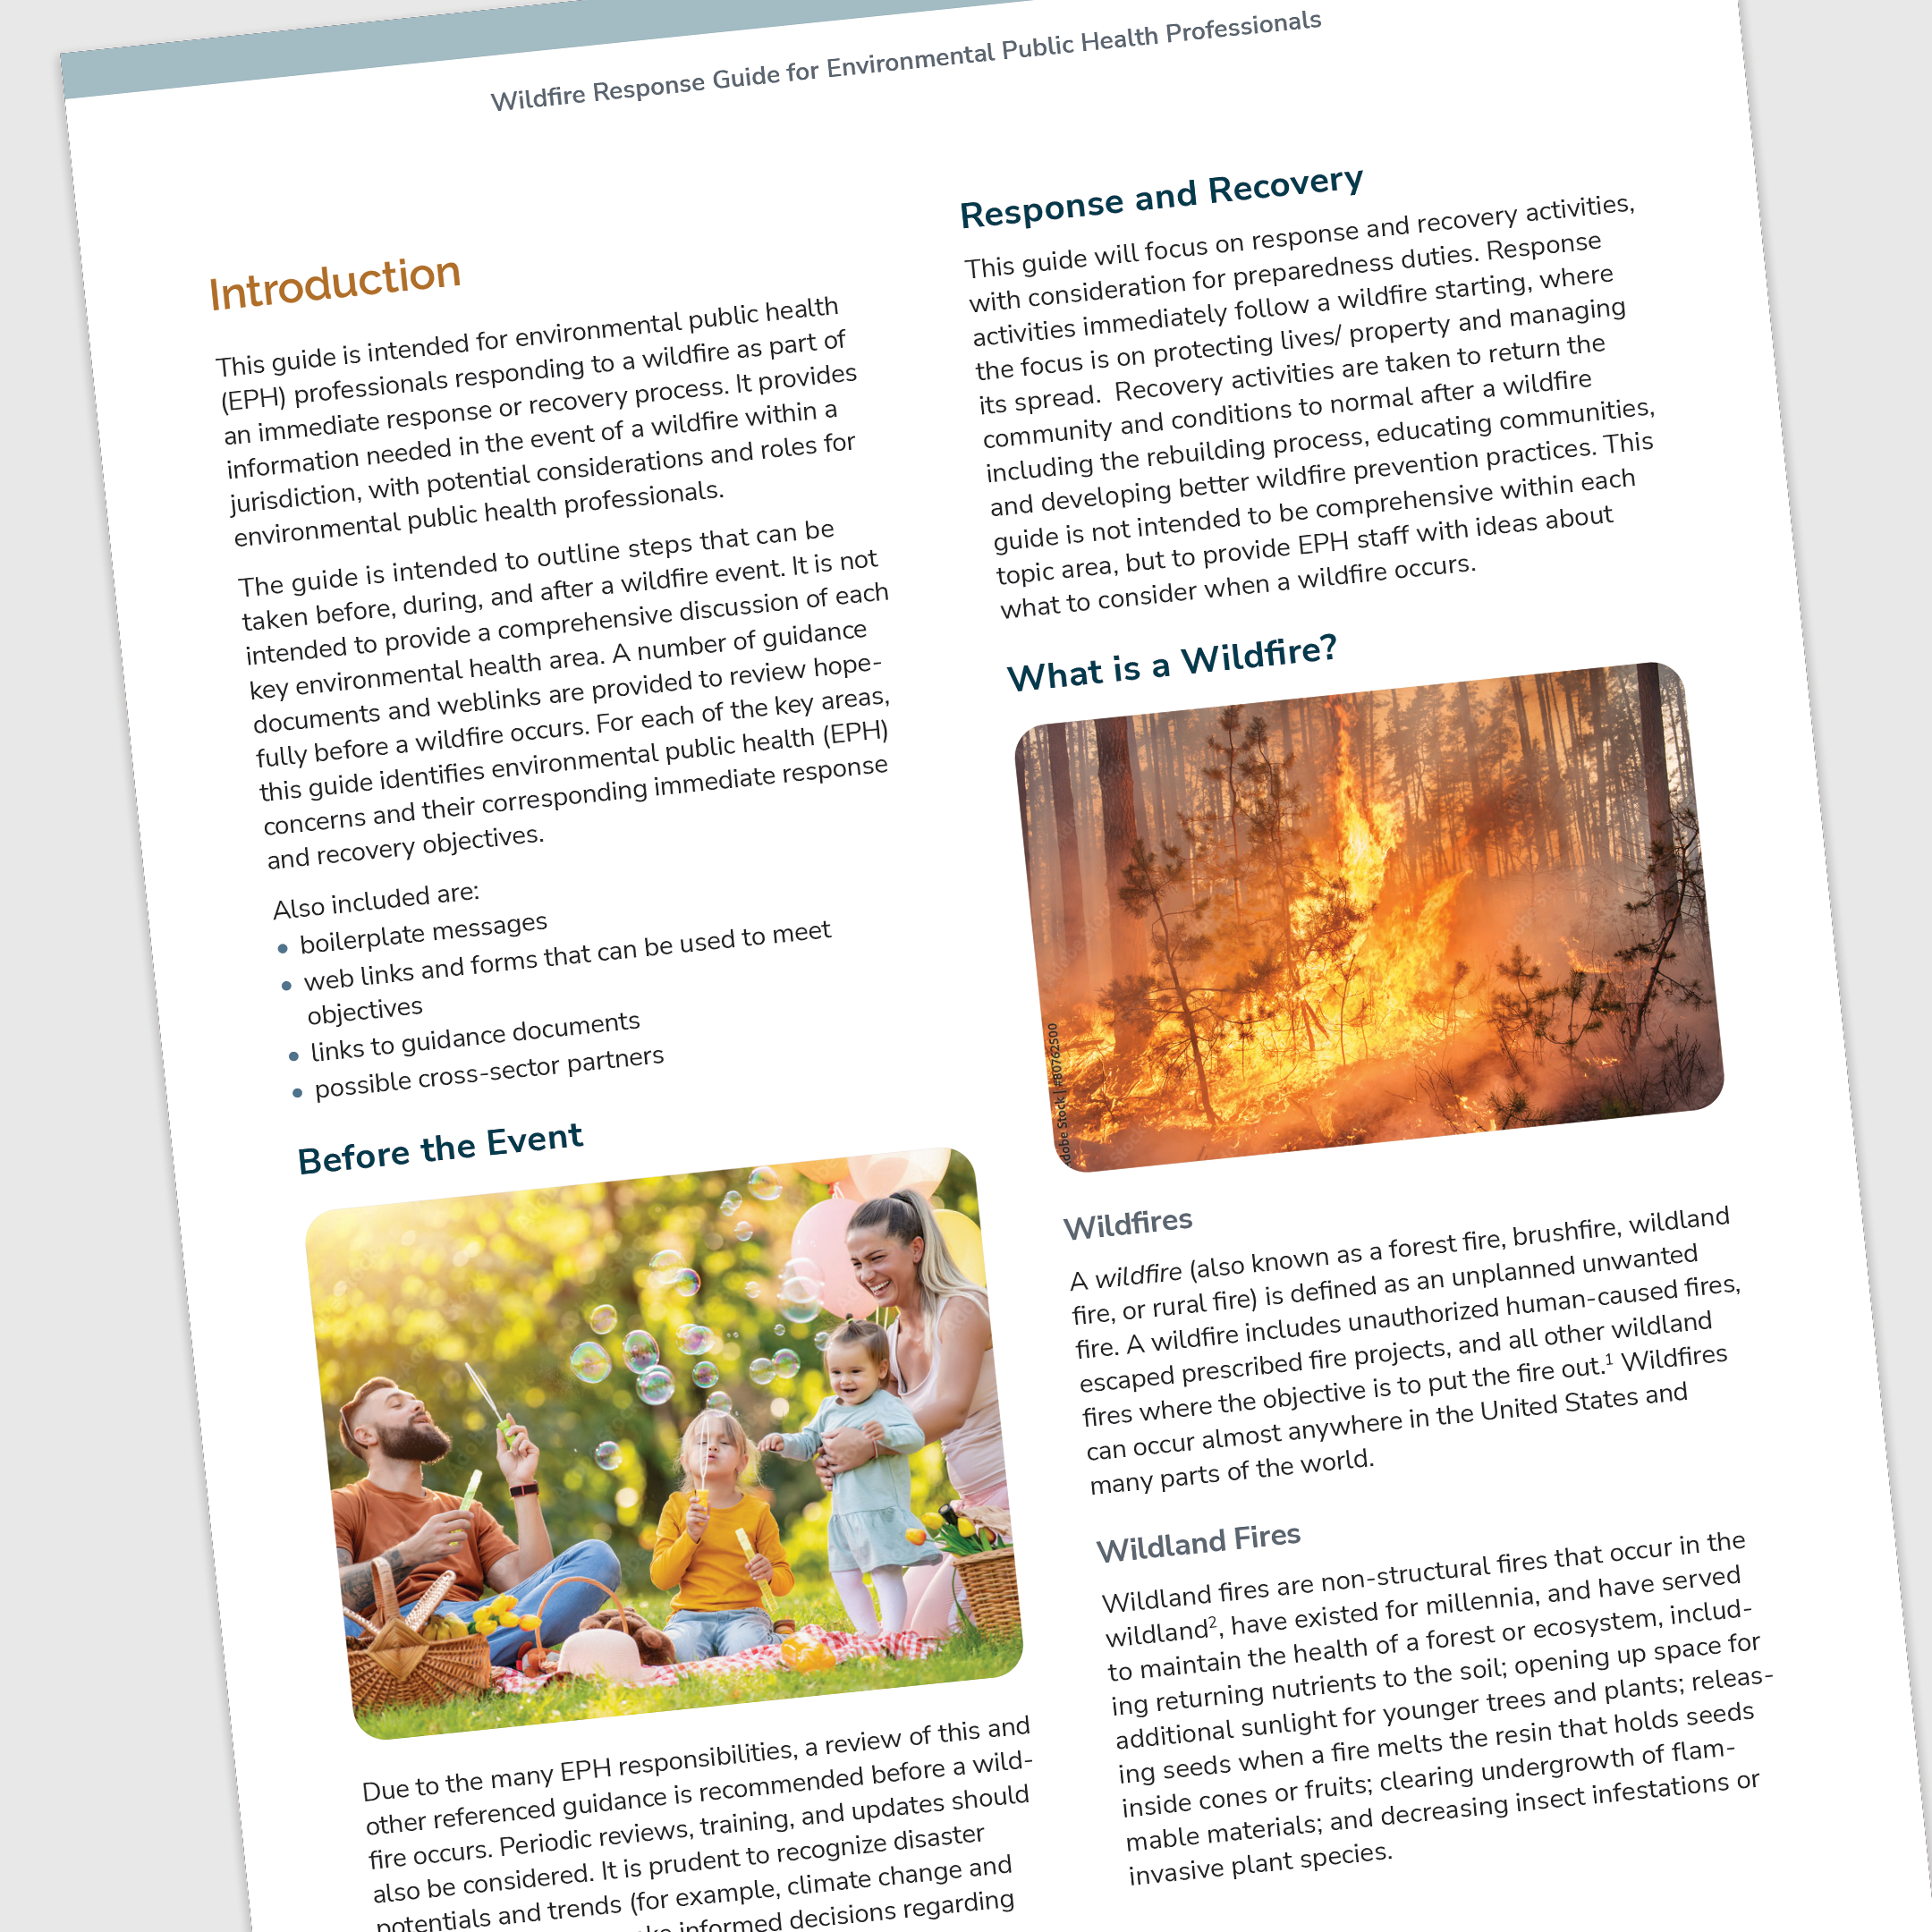 Wildfire Resource guide layout by Hughes Design Communications